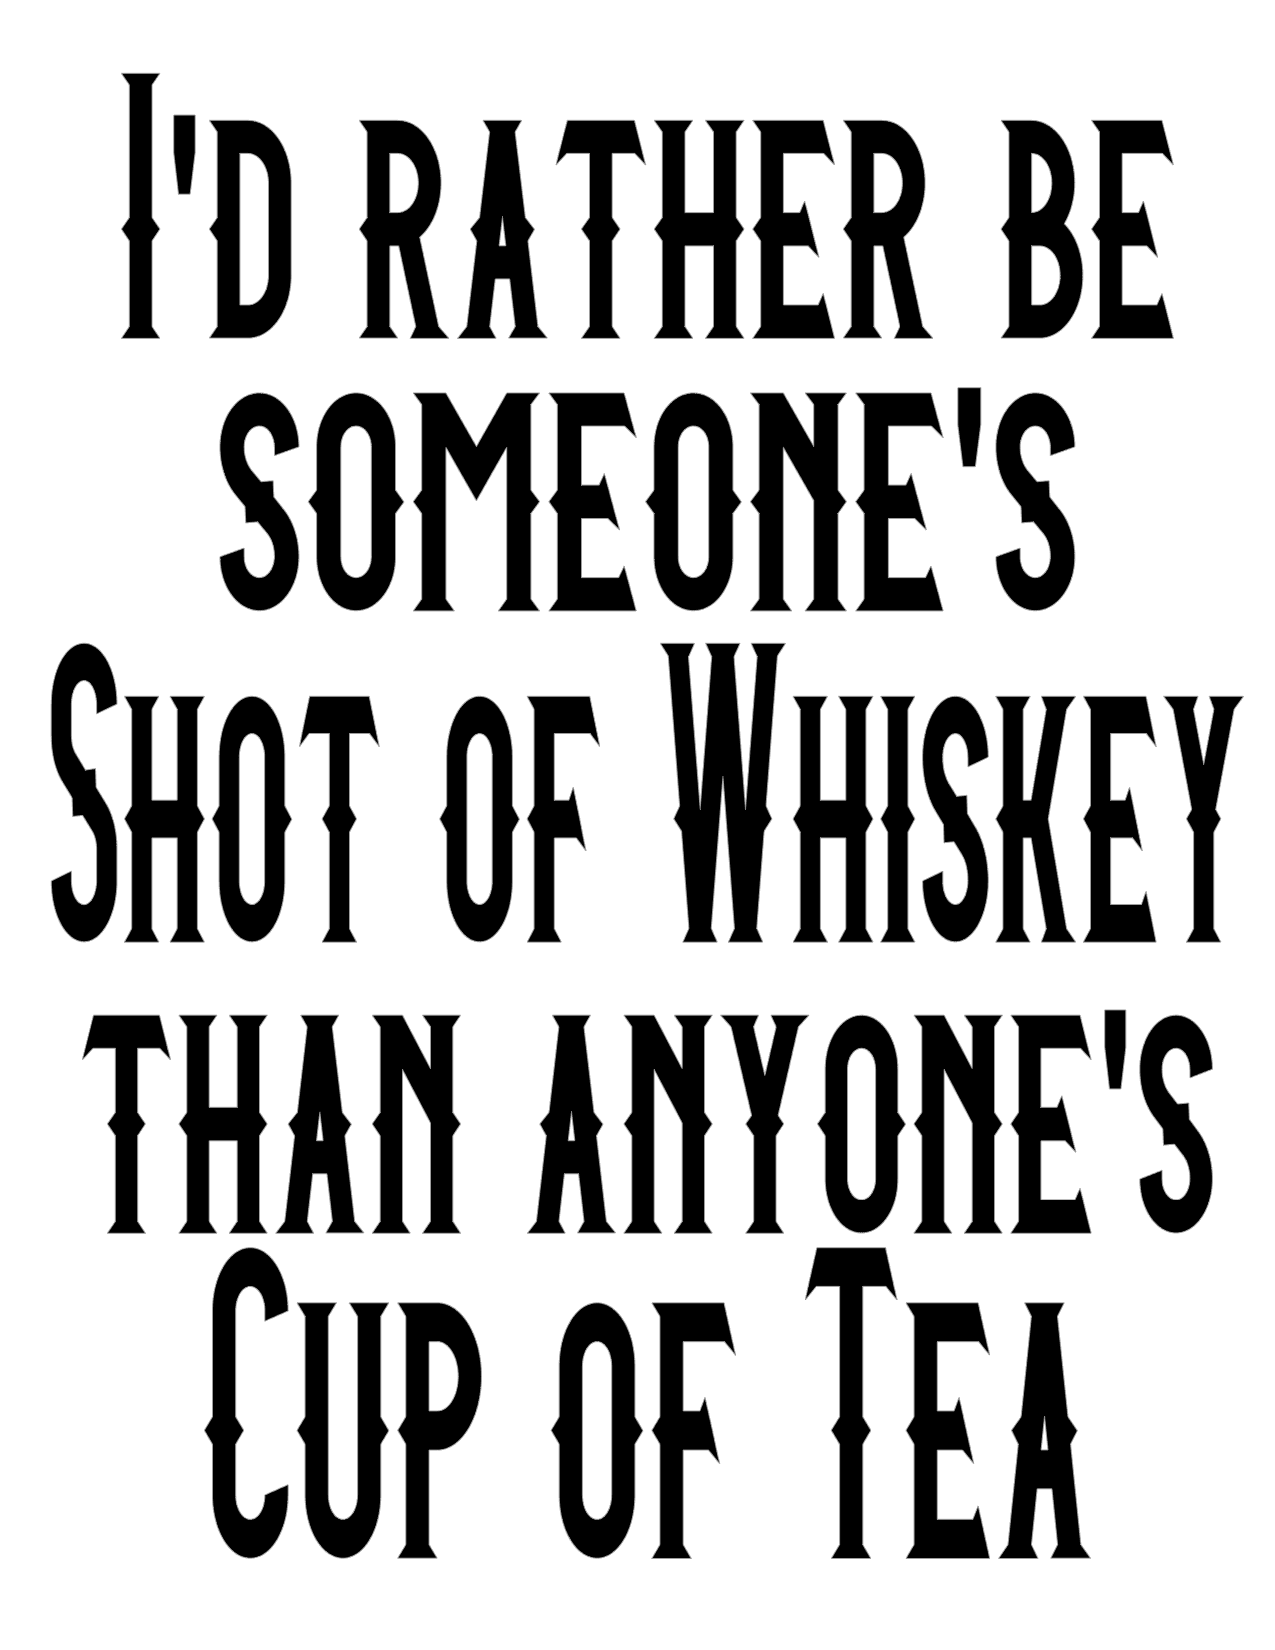 #181 I'd rather be someone's Shot of Whiskey than anyone's Cup of Tea